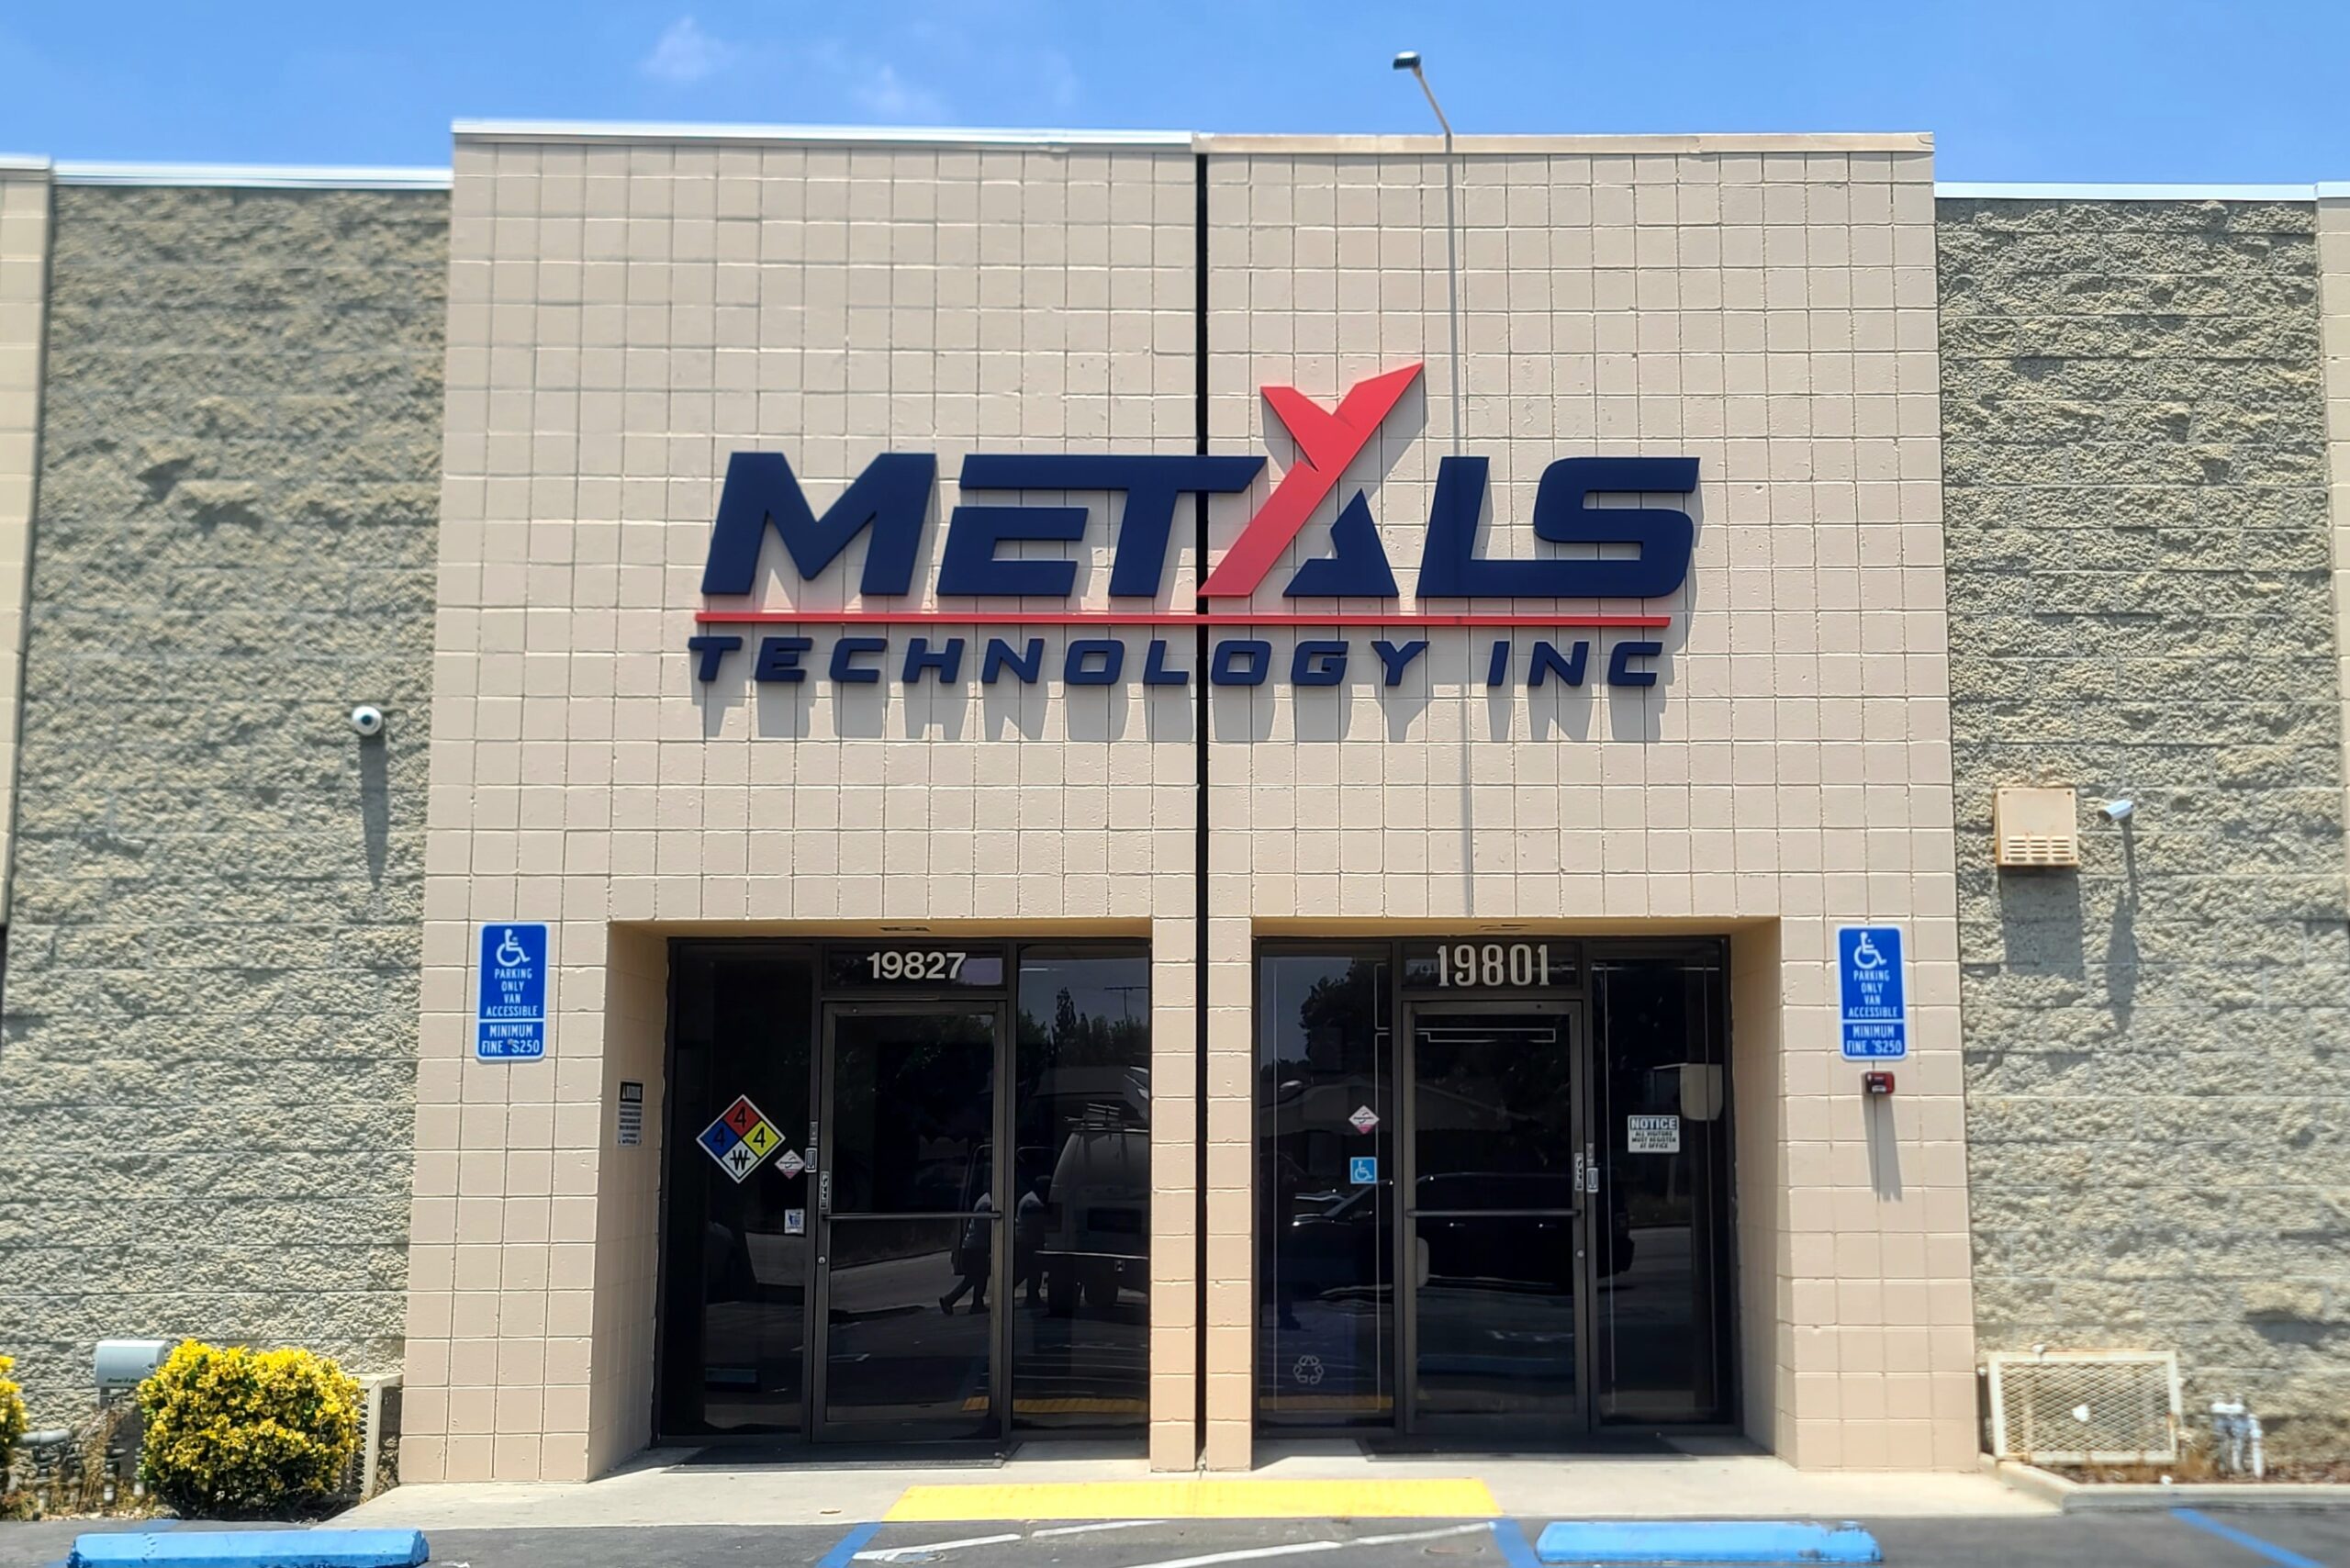 Metal sign installation, quality and precision